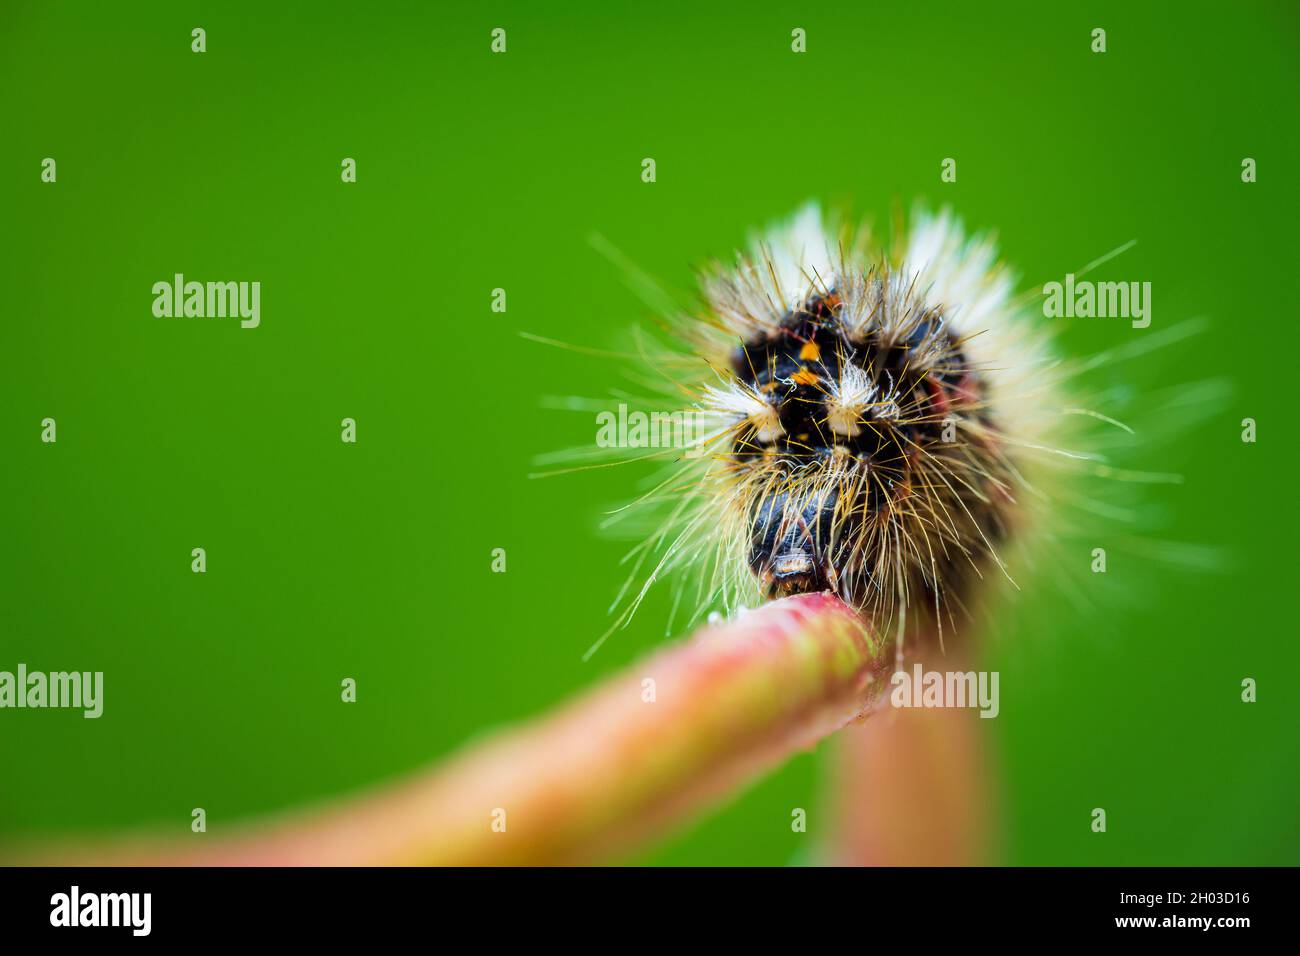 Grass moth, acronicta rumicis larvae, caterpillar climbing on stem with green background, front view. Macro animal Stock Photo